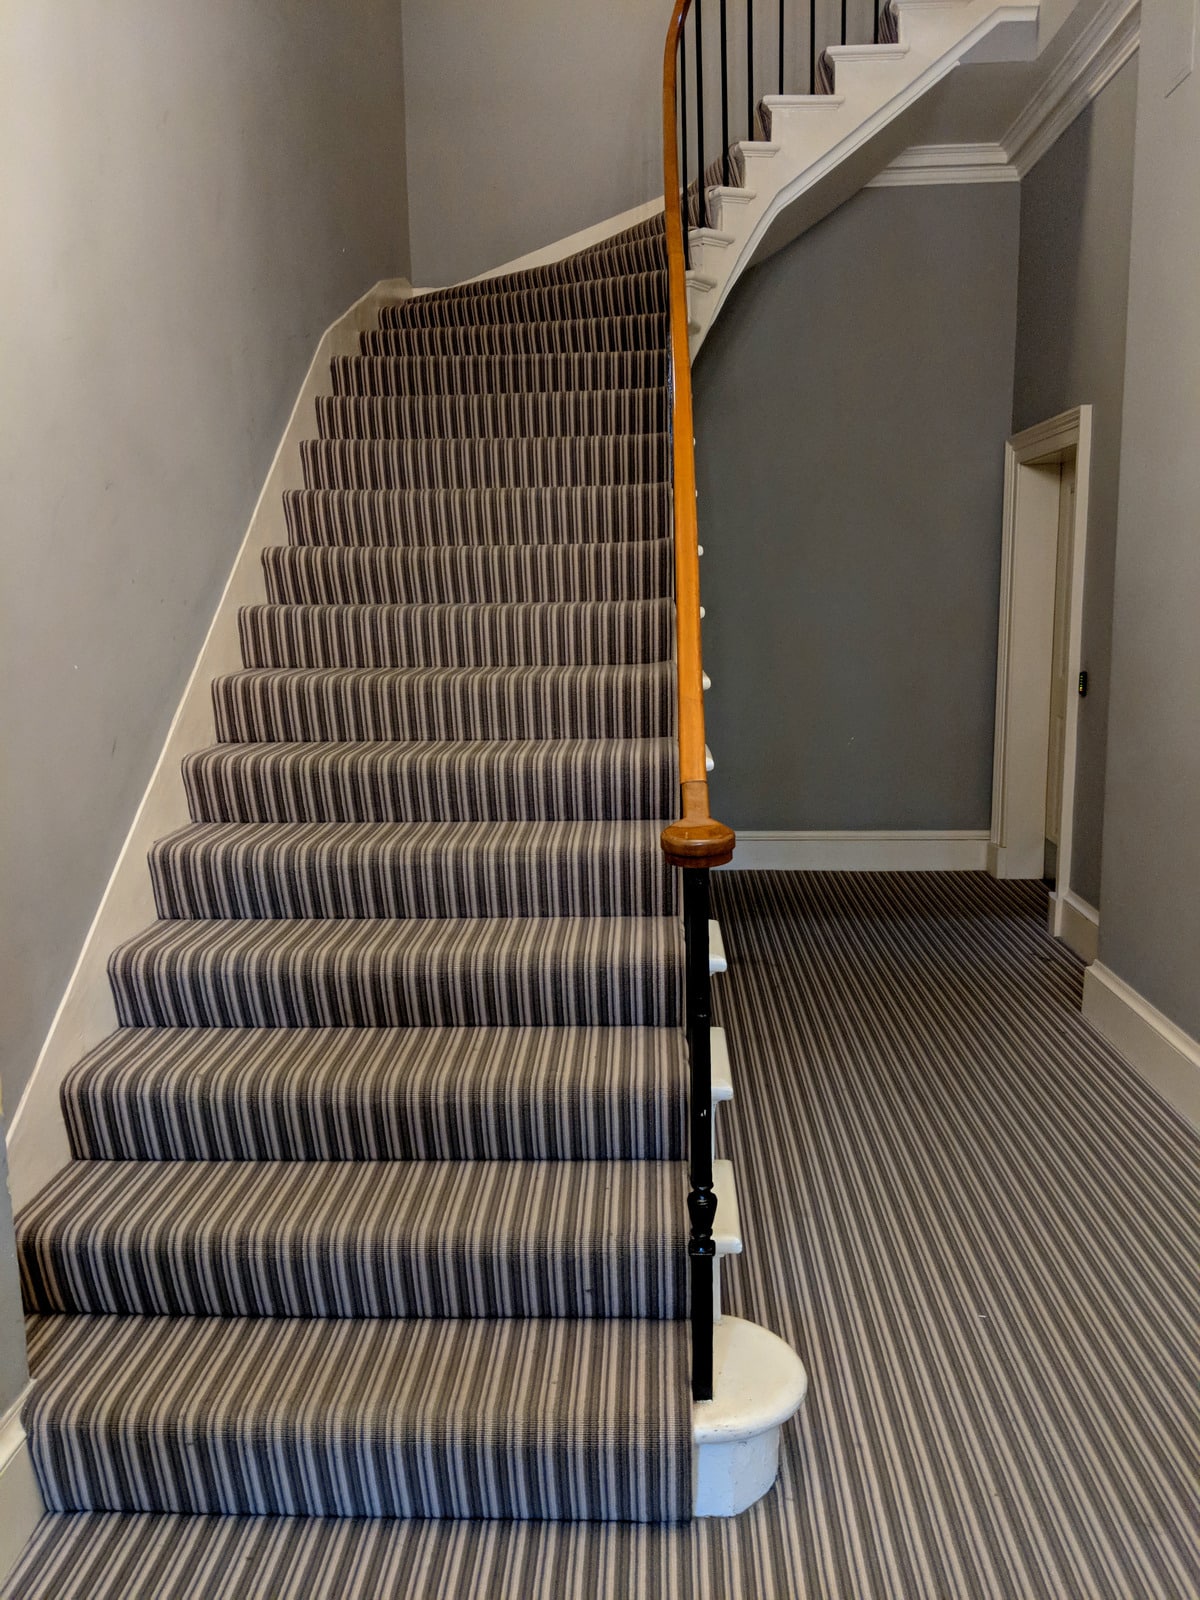 Carpeted staircase with muted neutral striped pattern